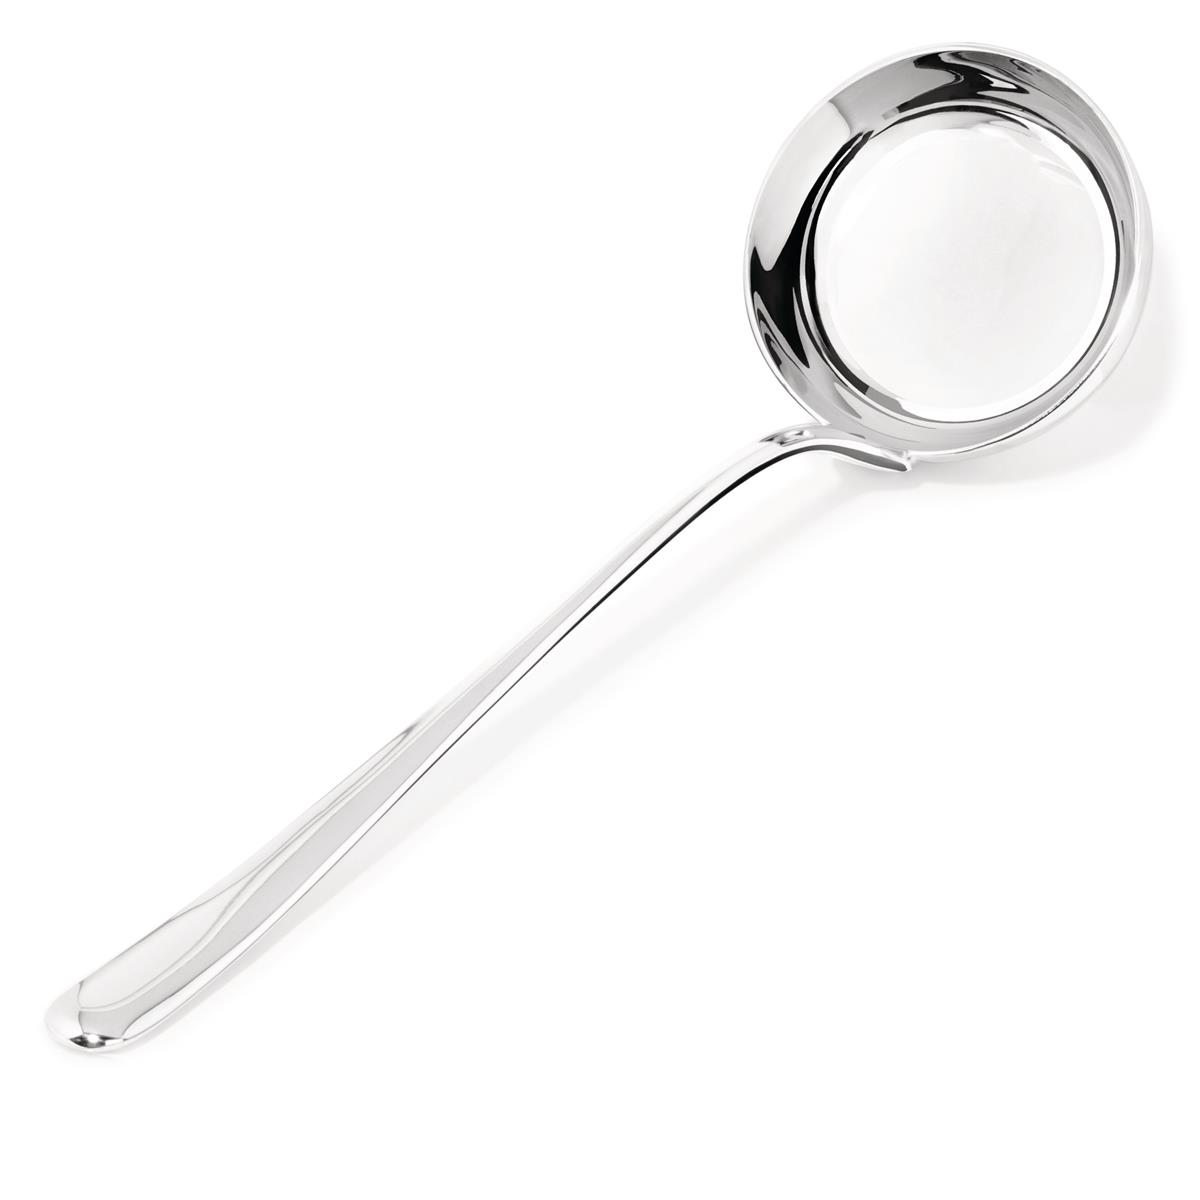 Alessi-Kalistò 1 Jar in 18/10 stainless steel with aluminum knob